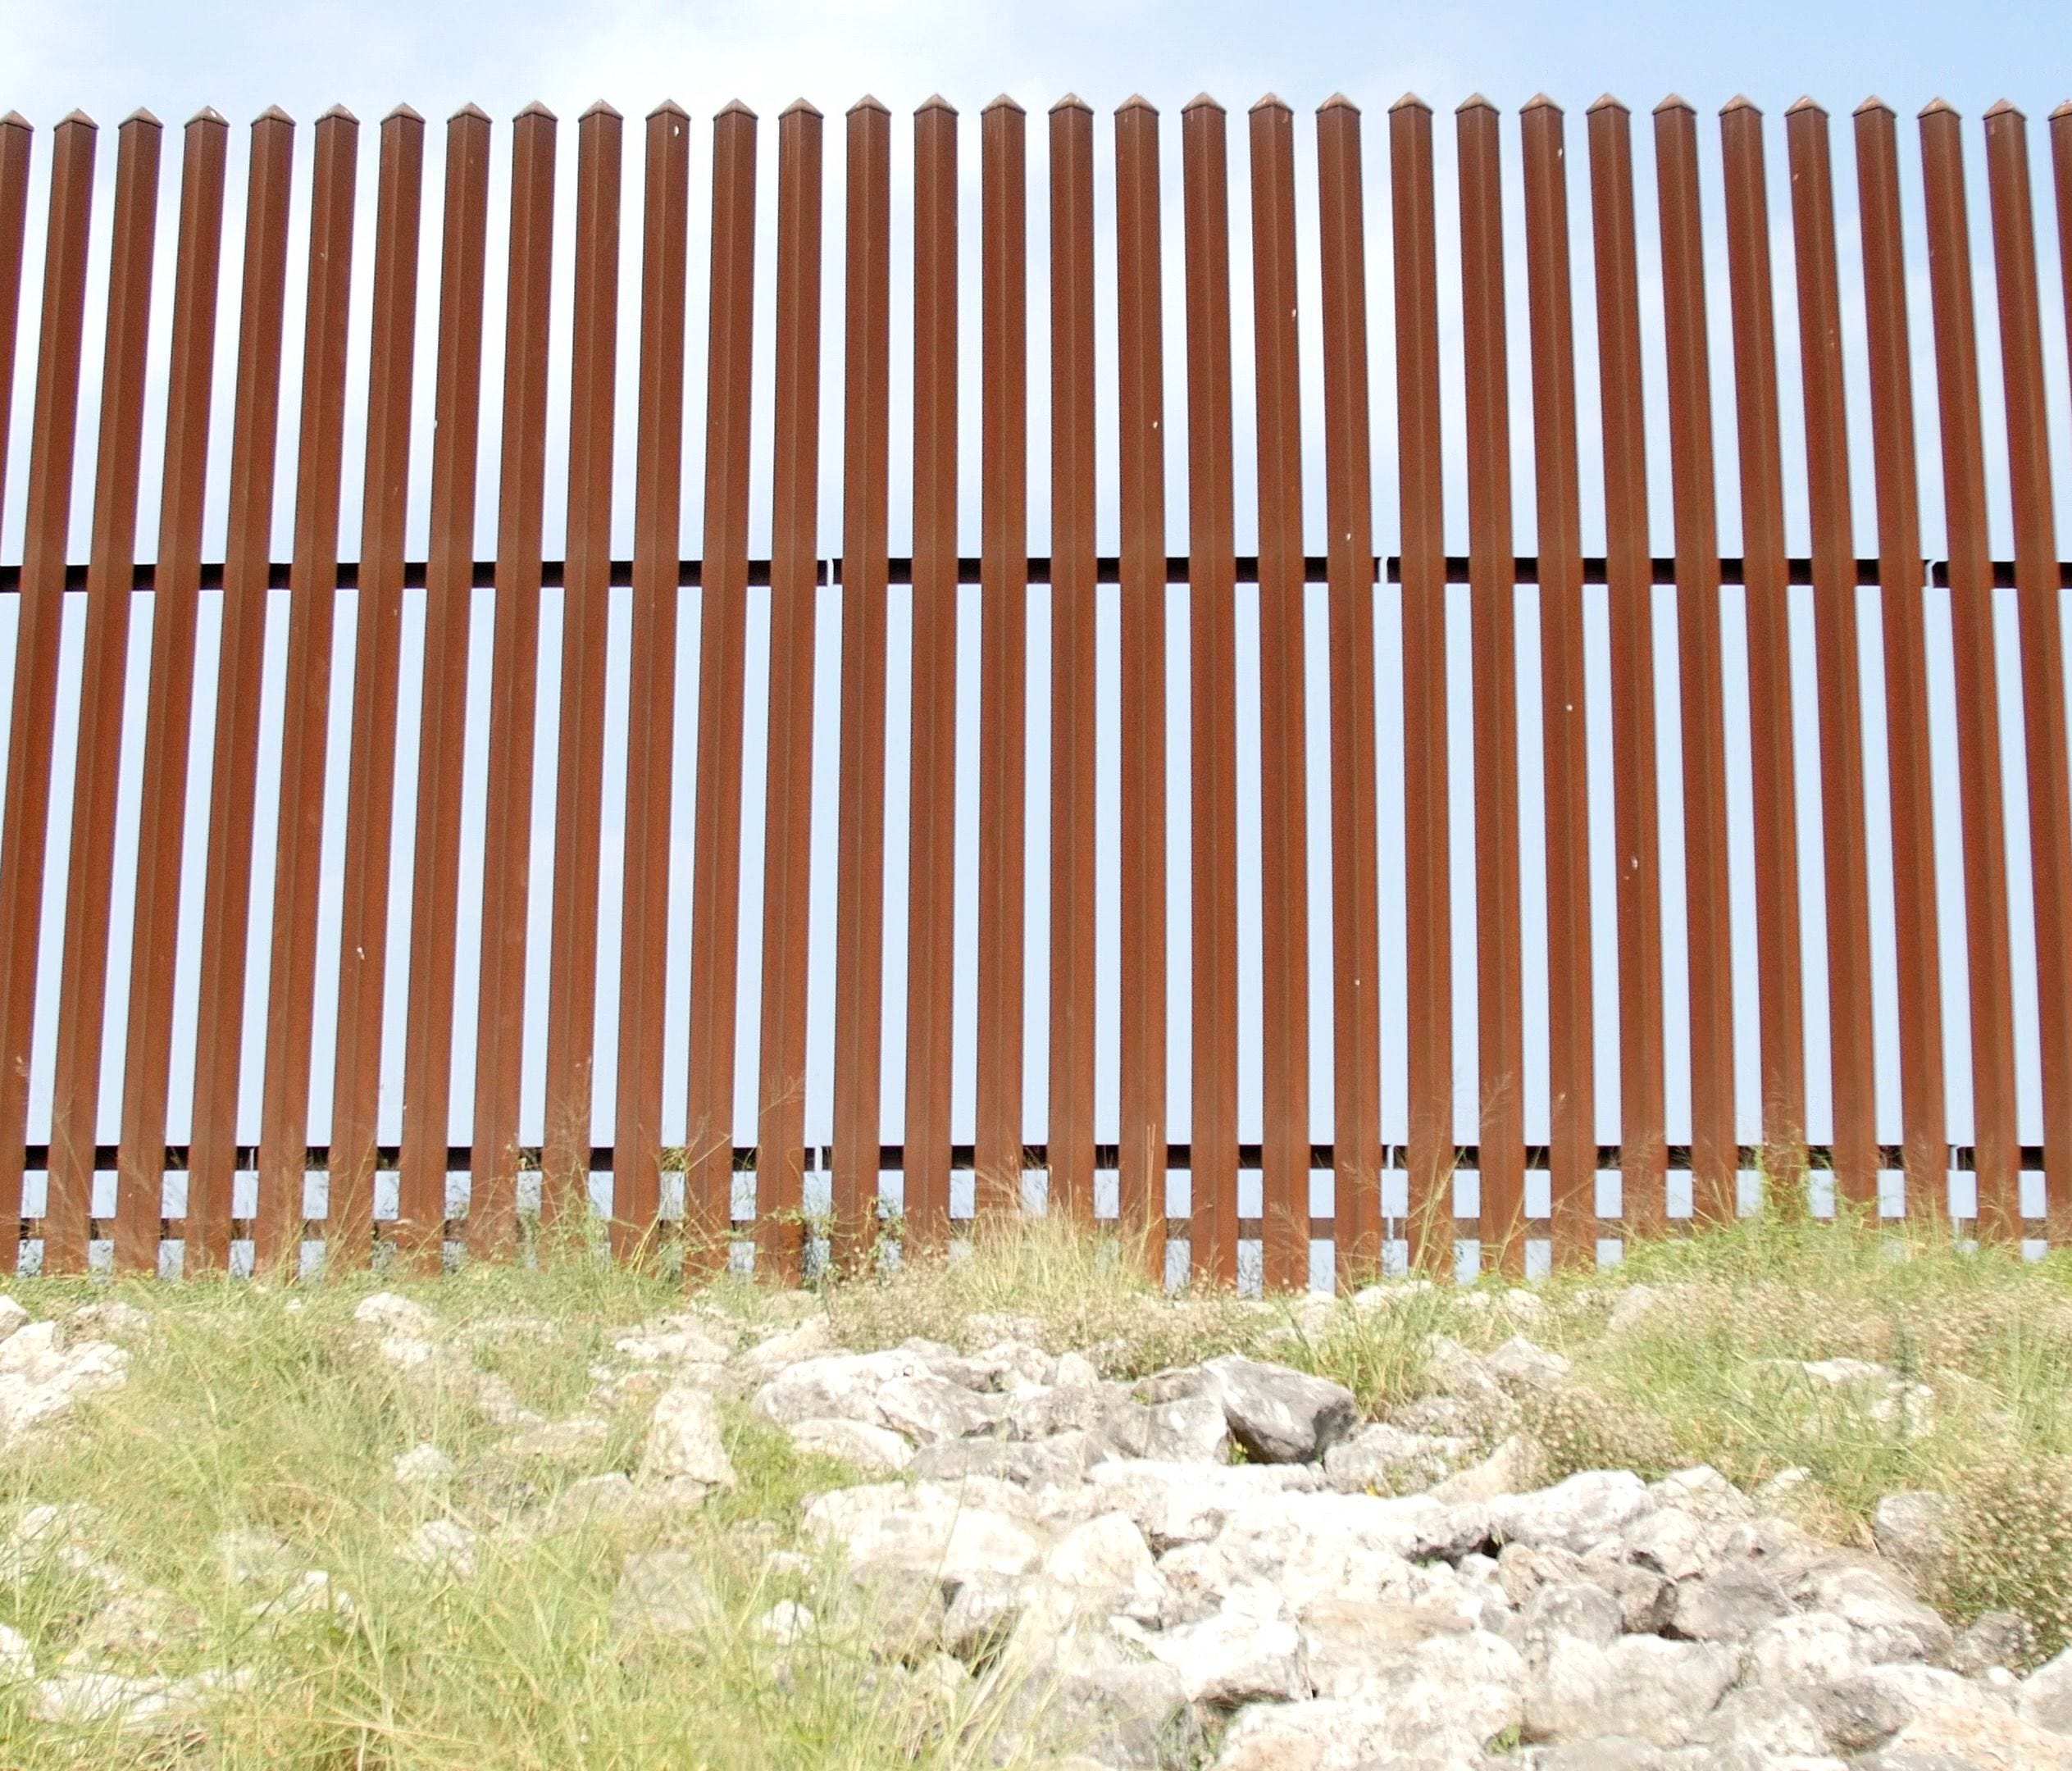 In Hidalgo, Texas, there is a stretch of rusting iron fencing created as a result of President Bush's Secure Fence Act of 2006.